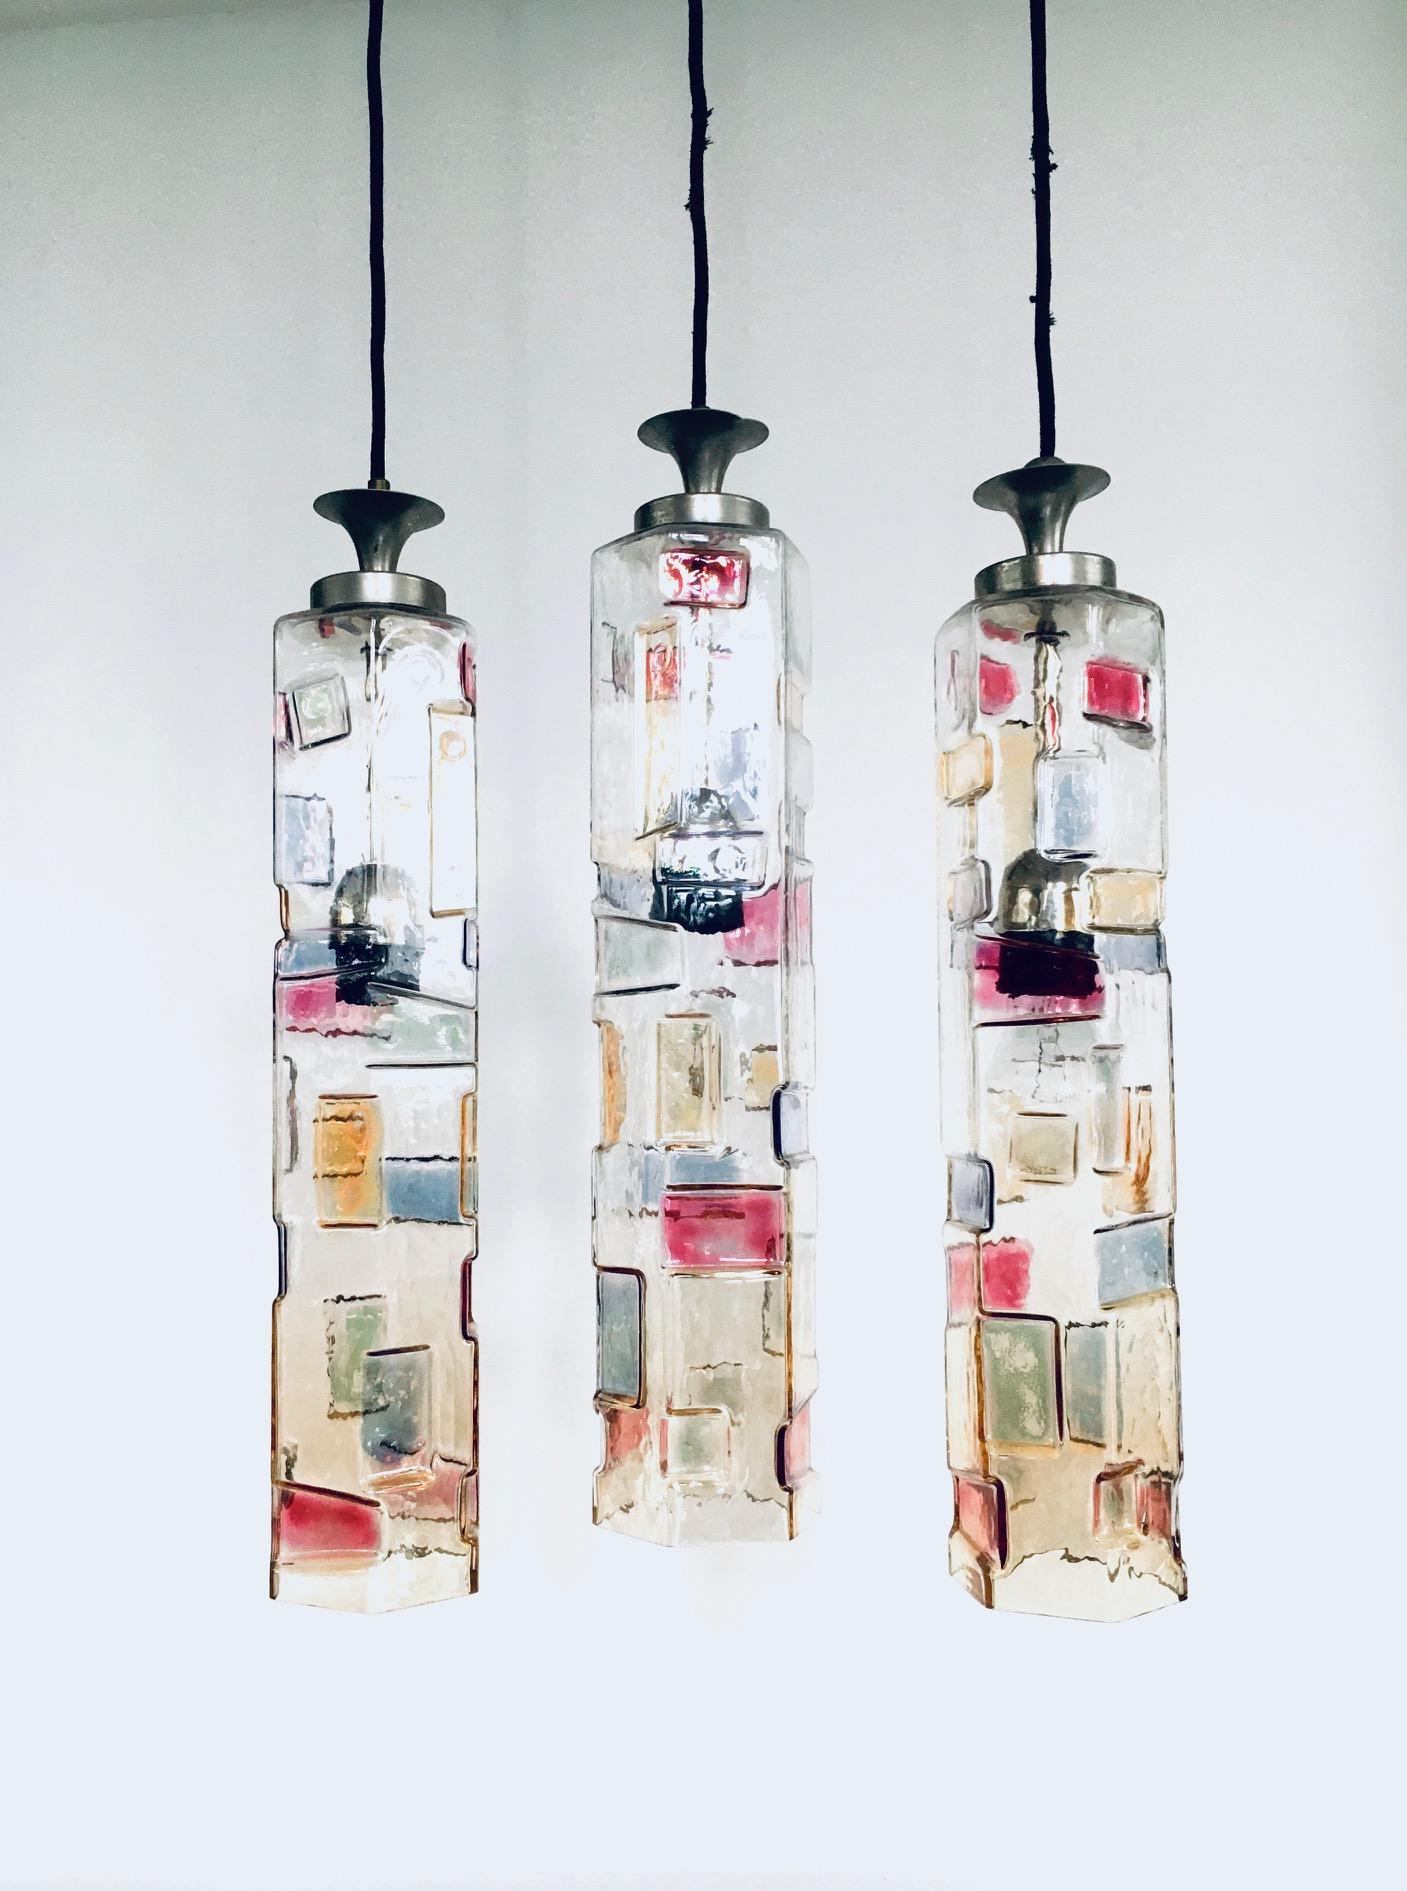 Vintage Midcentury Modern Italian Design Poliarte Colored Glass Pendant Lamp set of 3, Poliarte, Italy 1950's - 1955. Hexagonal glass tube. 3 Dimensional with colored patterns. Very RARE Lamps. 3 seperate hanging lamps. All original glass with